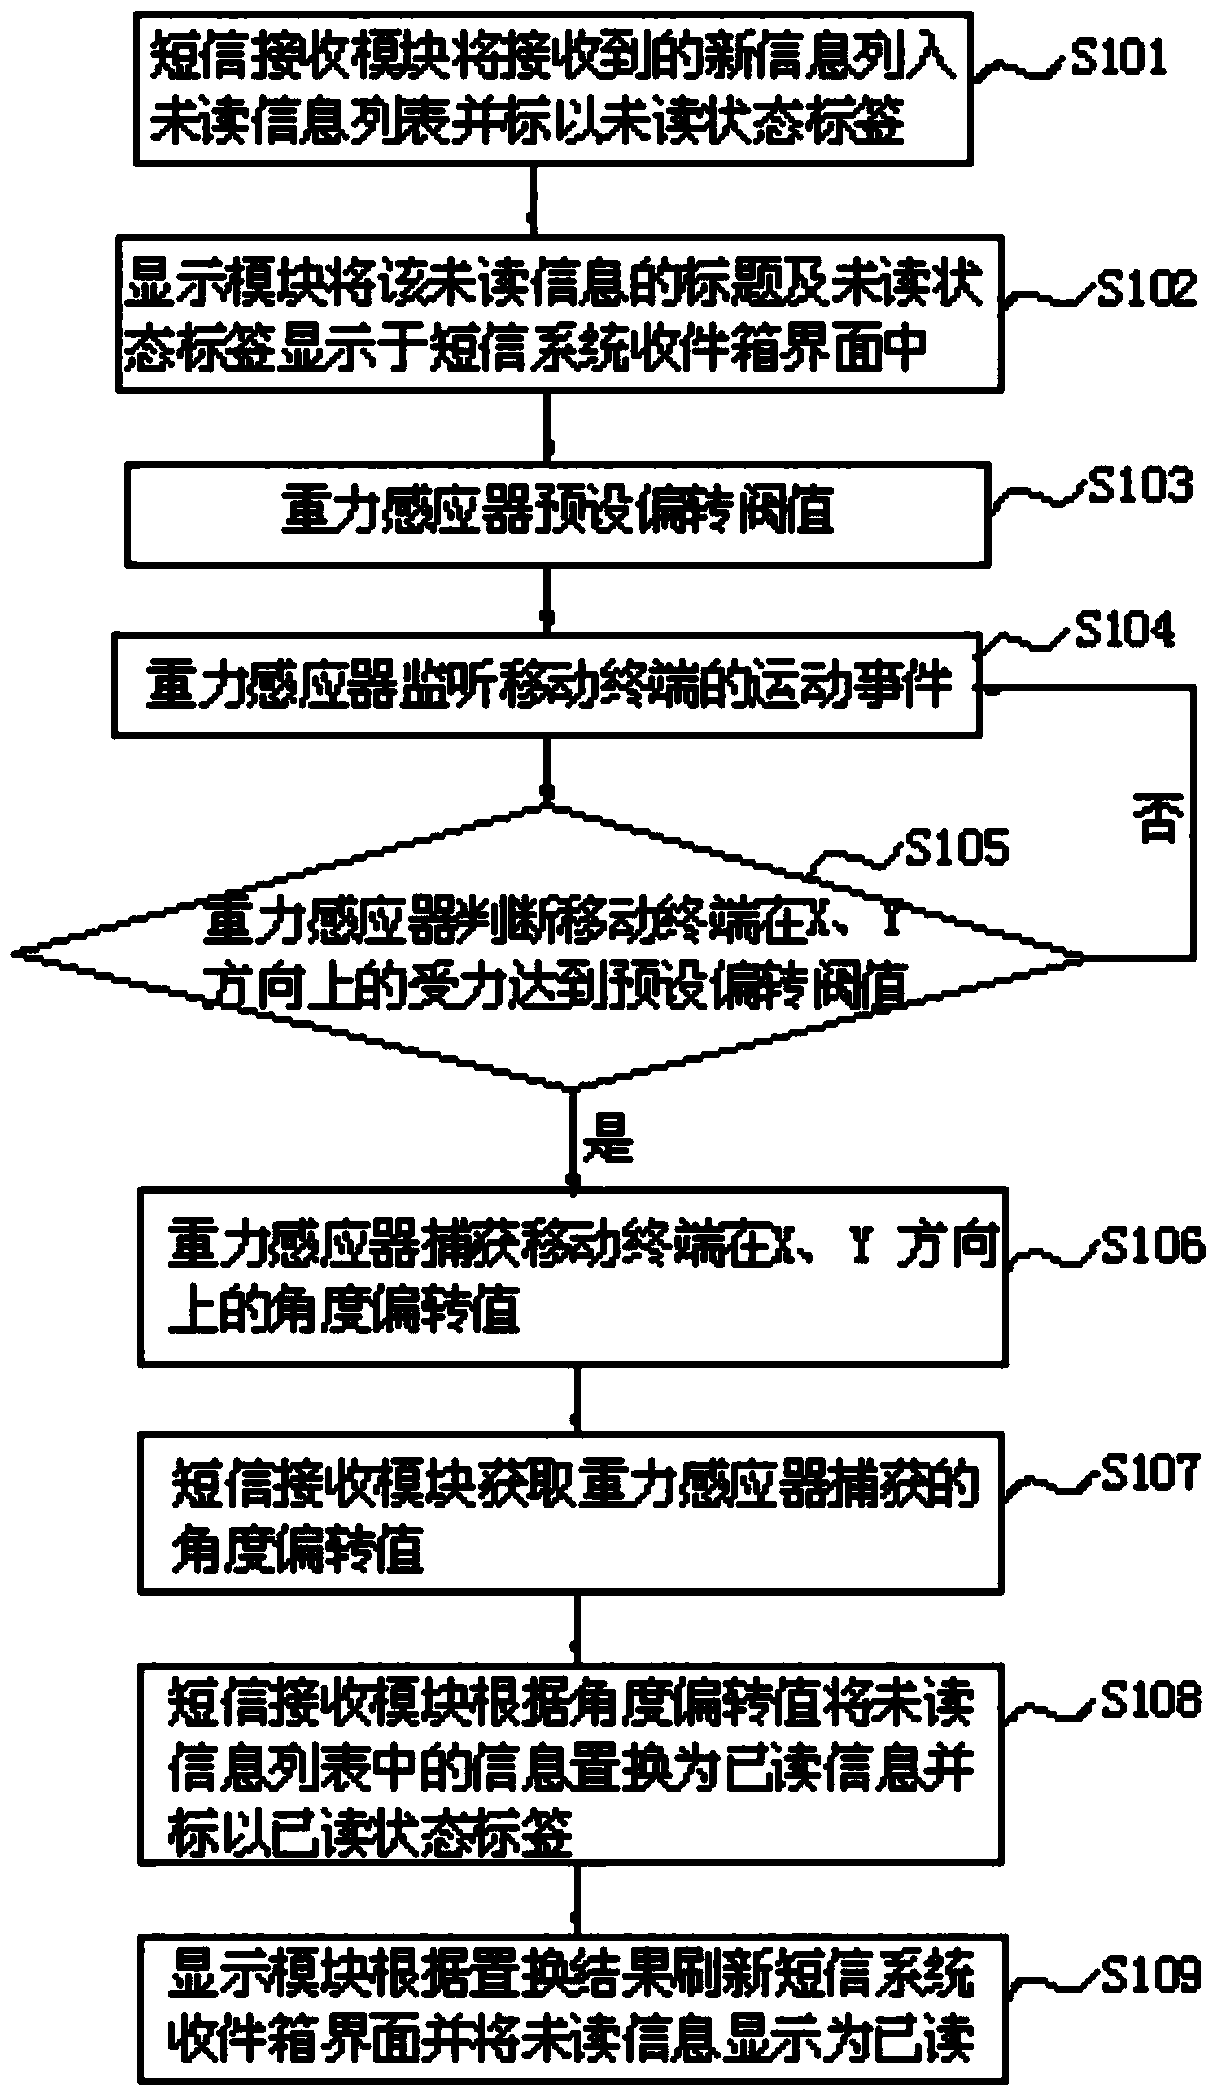 Method and system for processing unread short messages